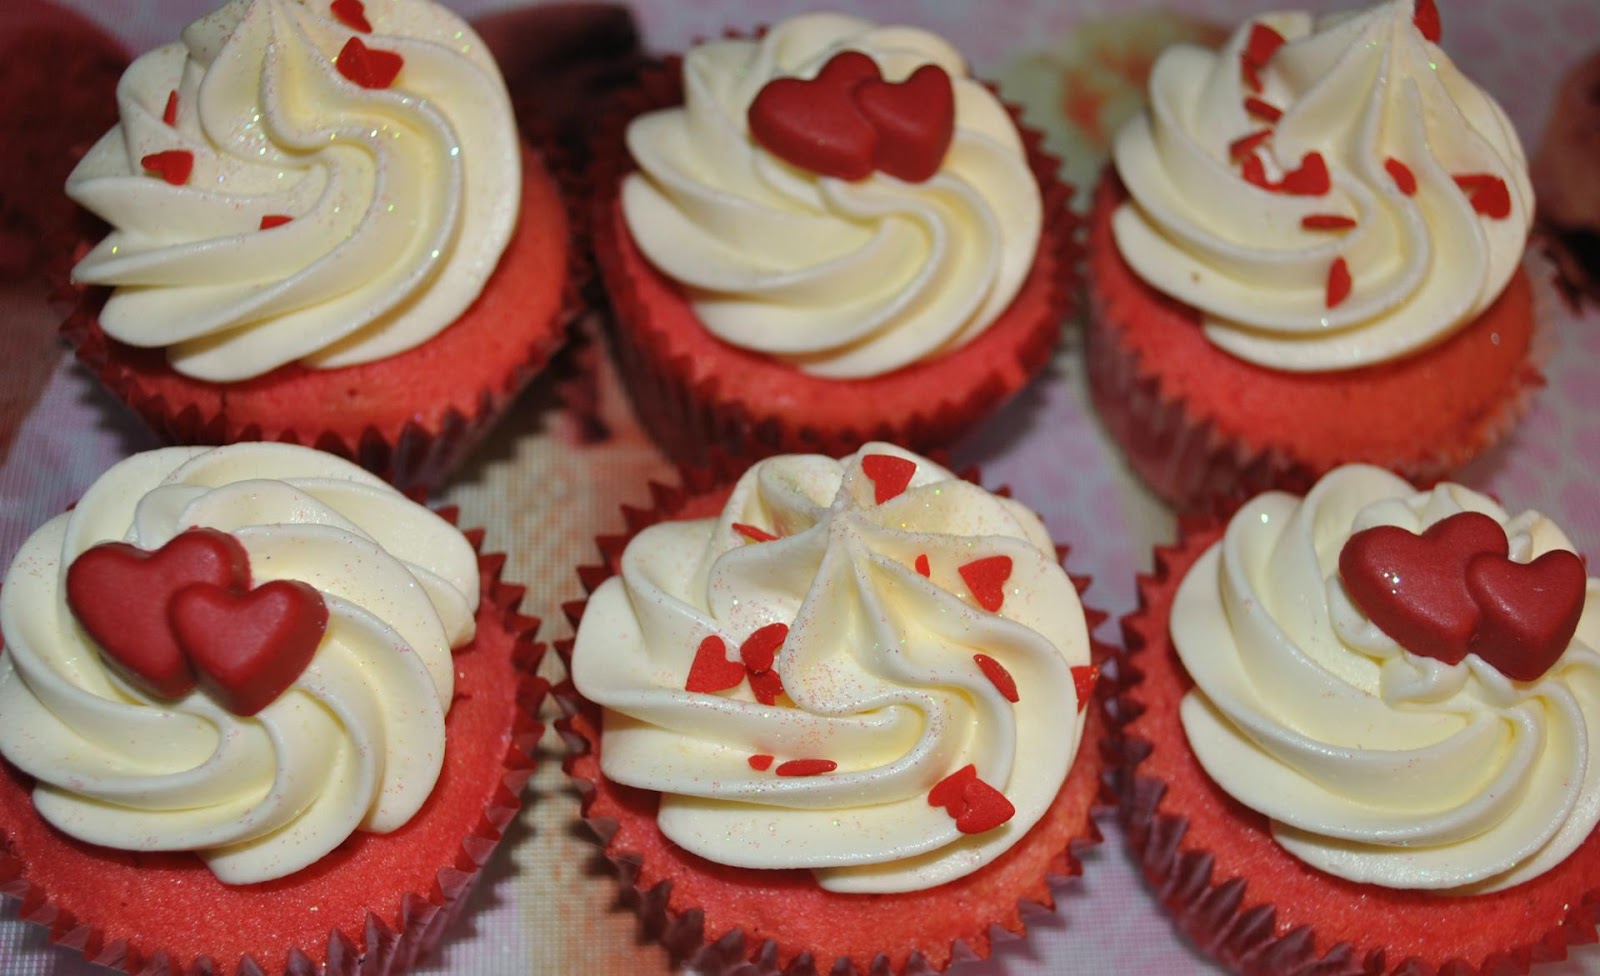 Valentine's Day Cakes and Cupcakes